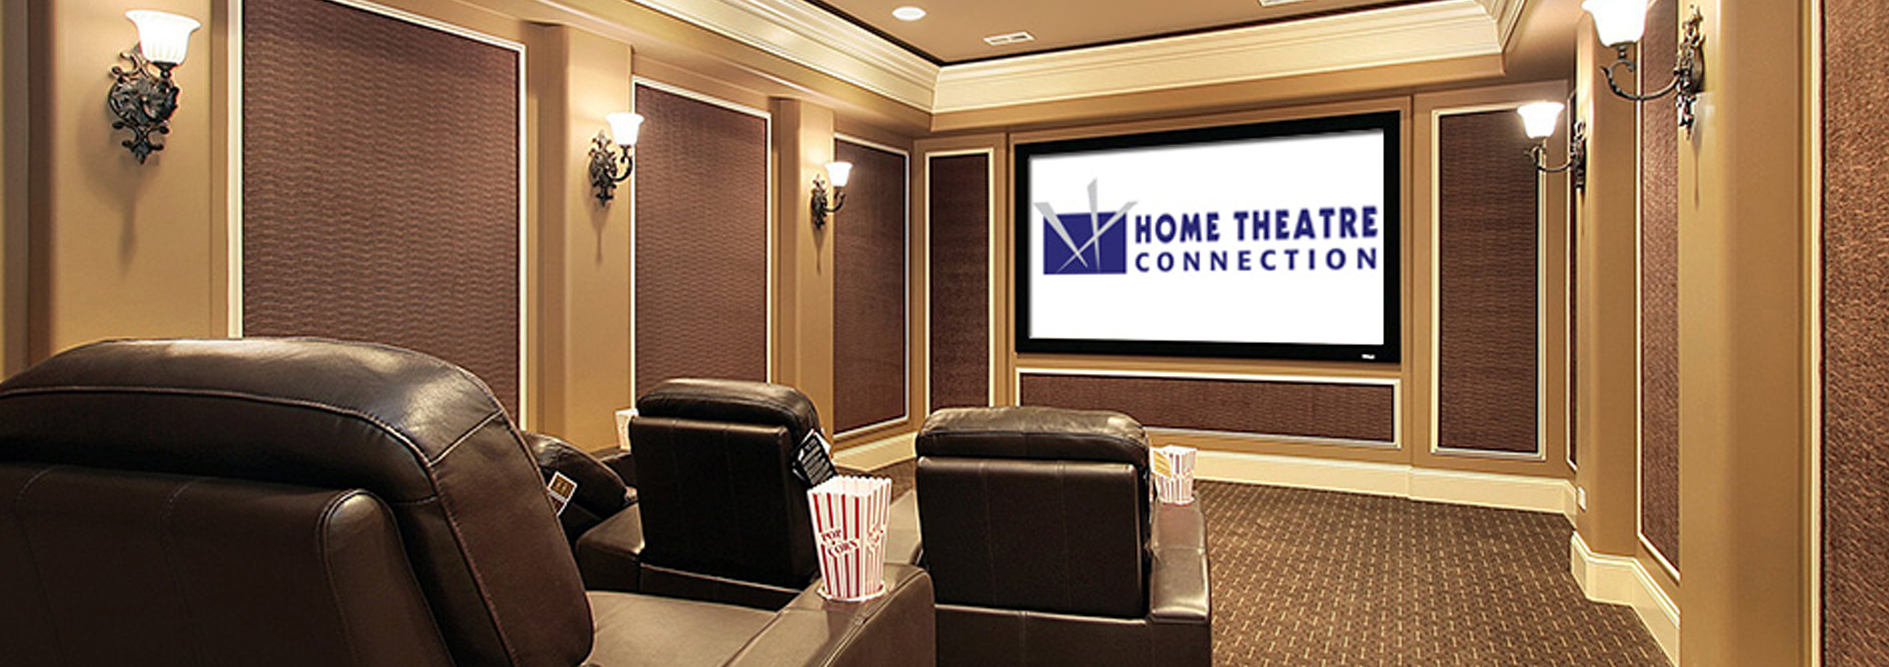 Home Theater Installation Home Automation System Home